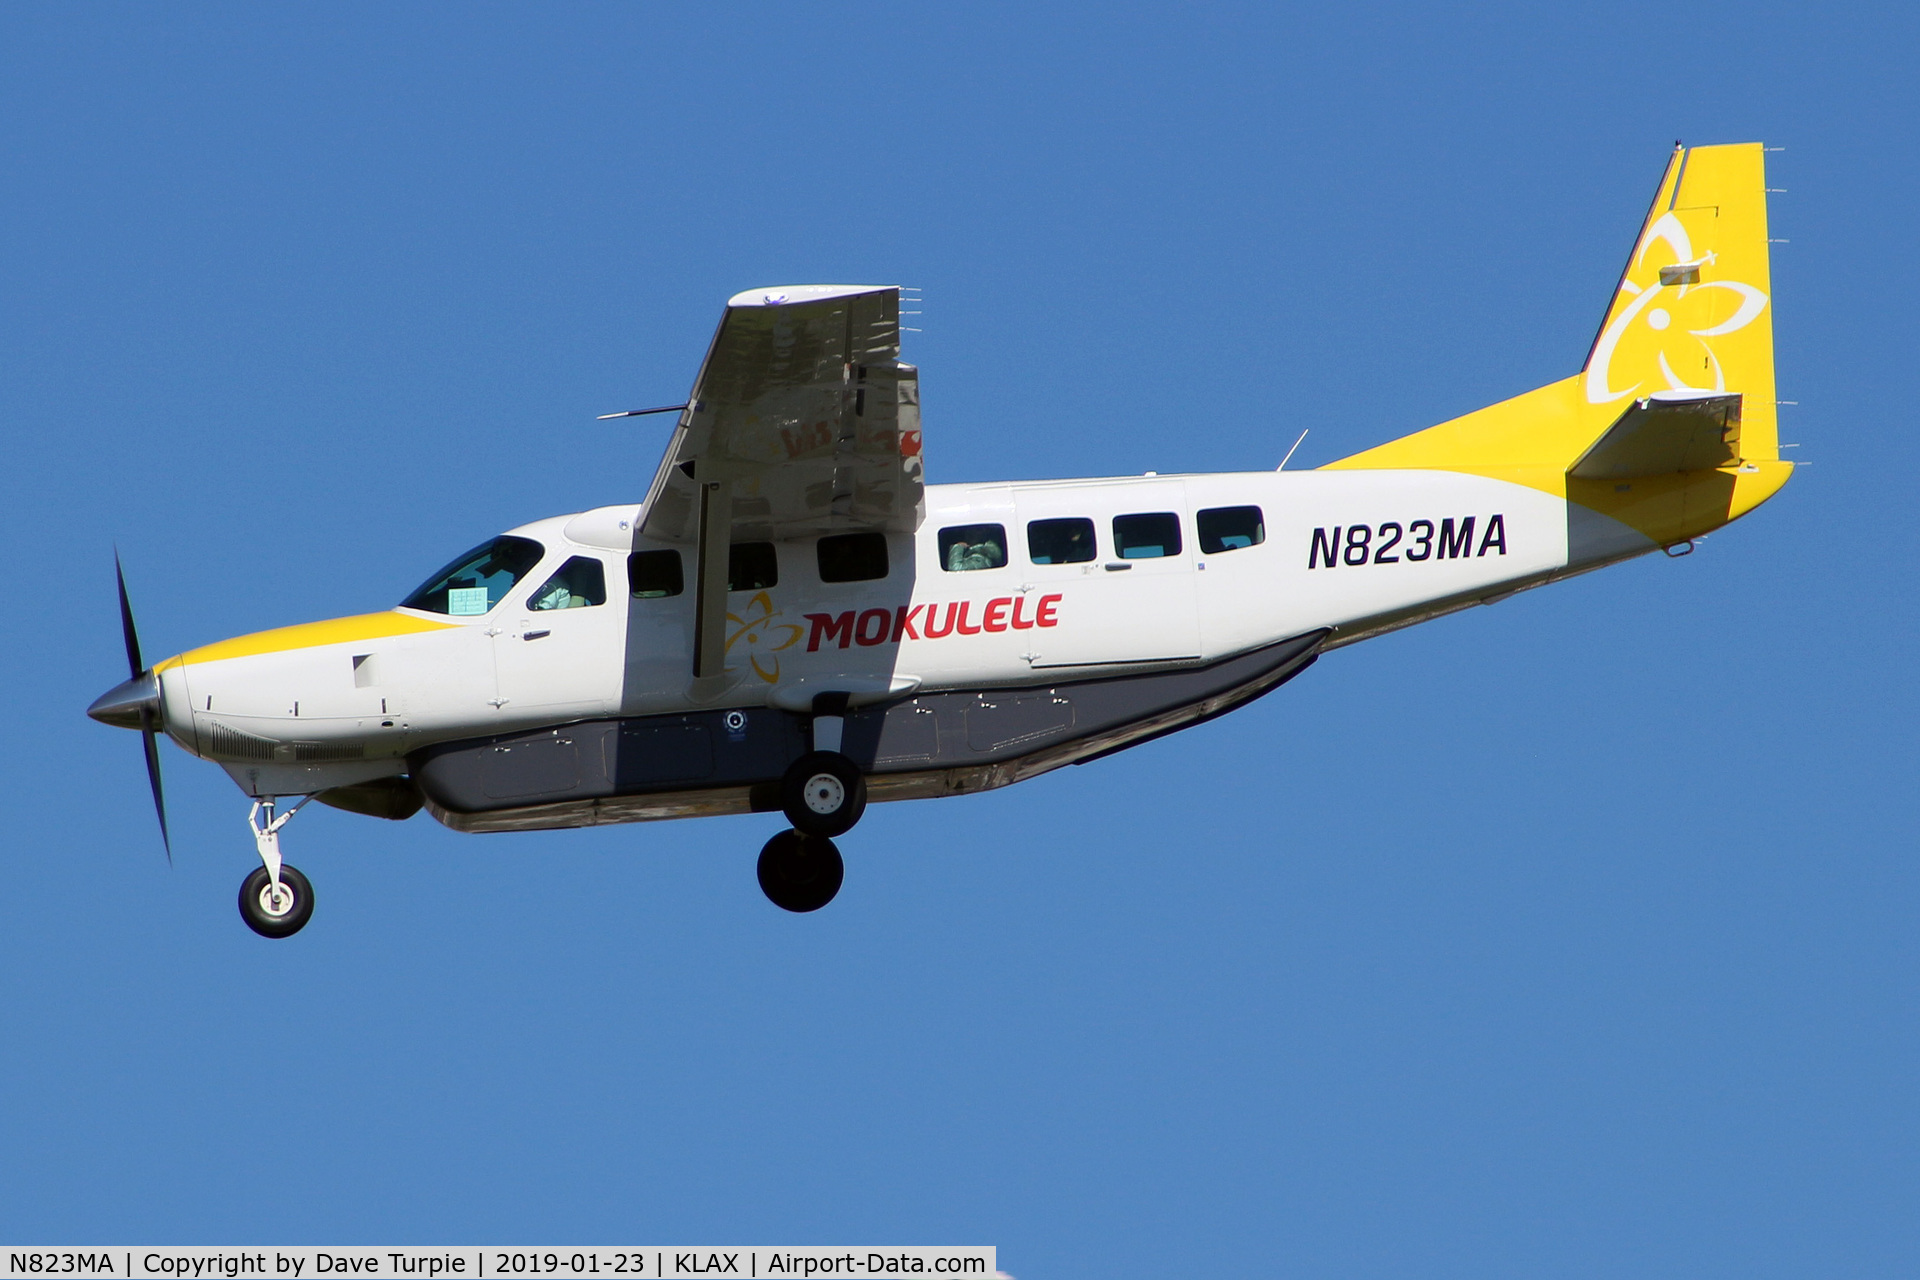 N823MA, 2018 Cessna 208B C/N 208B5470, Mokulele Airlines is primarily a Hawaiian airline.  This partiular plane shuttles between KLAX and Imperial, California.